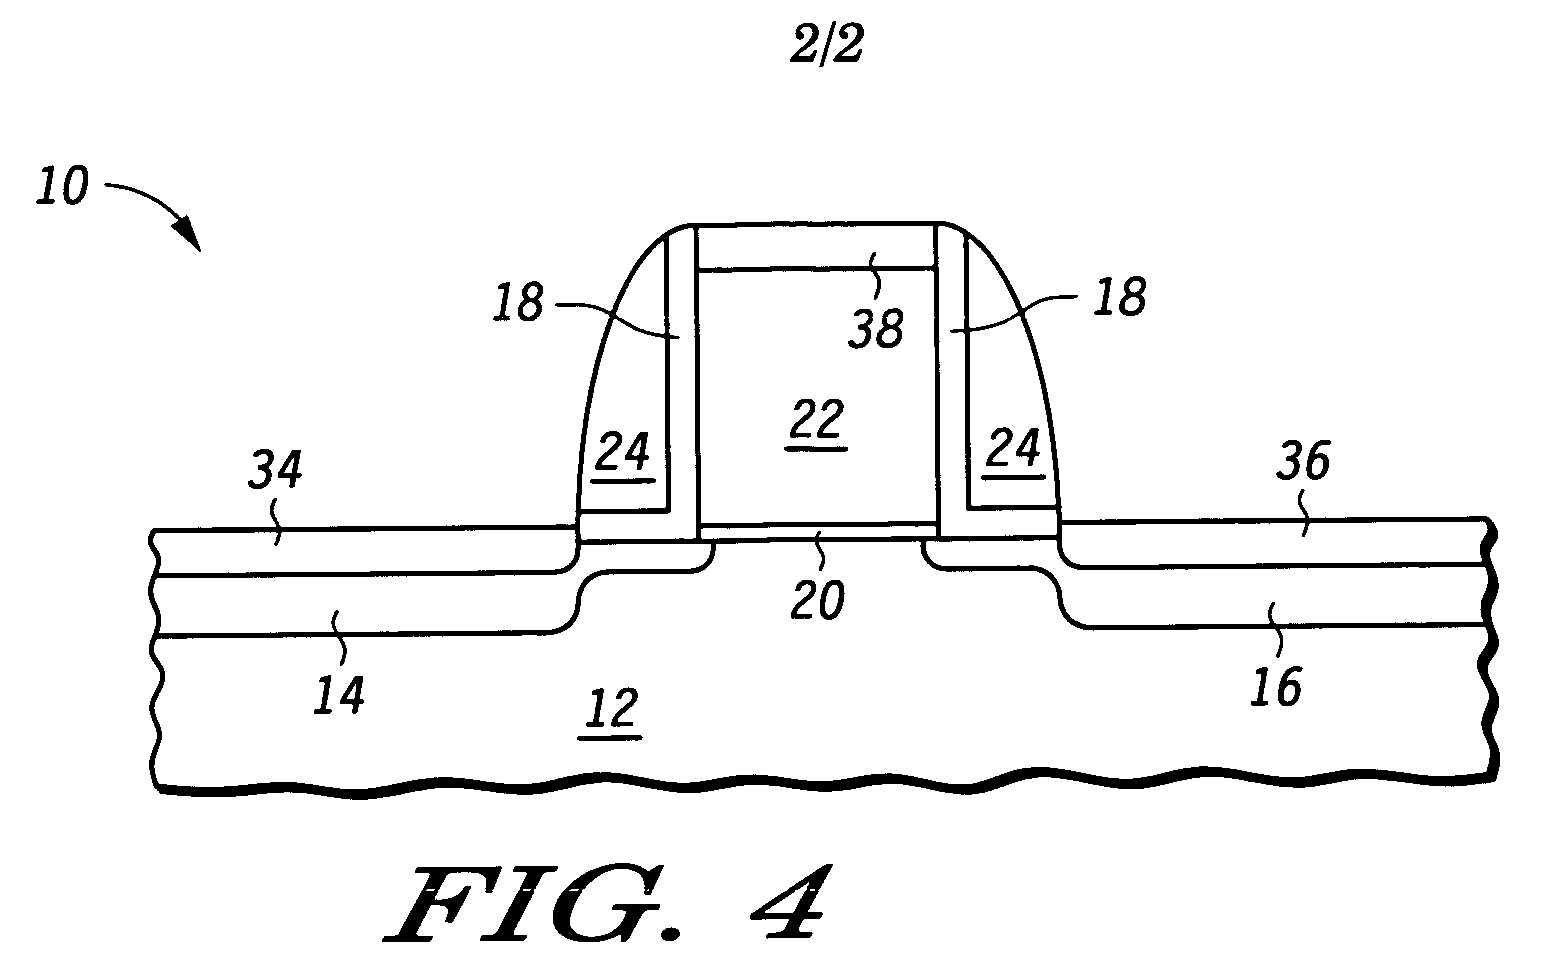 Silicide formation for a semiconductor device